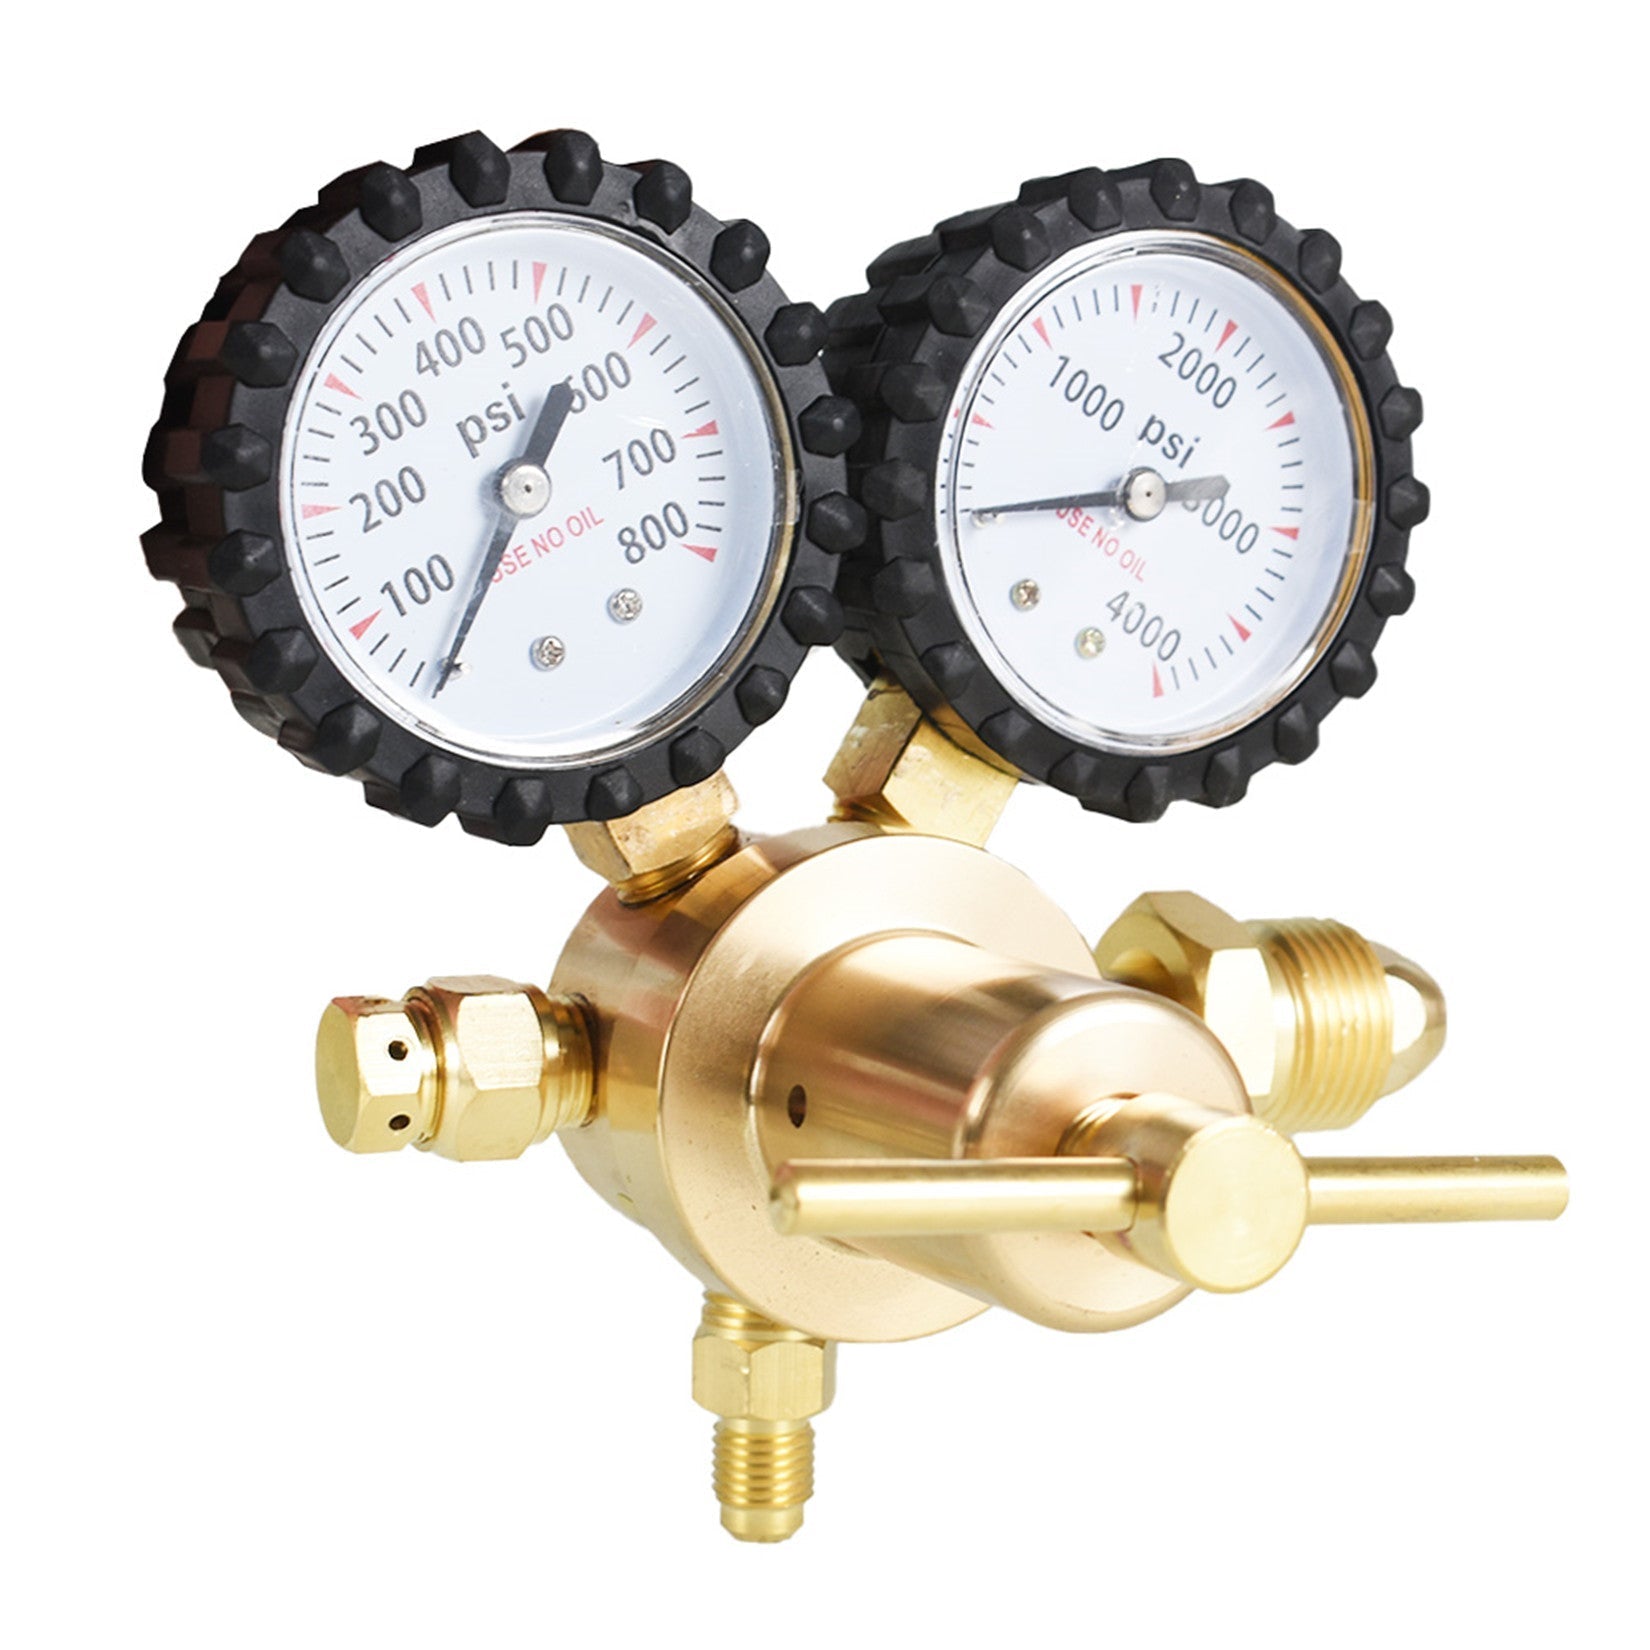 findmall  Nitrogen Regulator 0-600PSI Delivery Pressure Brass CGA580 Inlet Tank Threads 1/4 Inch Male Flare Outlet Connection - UNF7/16-20 Outlet Threads Heavy-Duty Handle Self-reseating Relief Valve FINDMALLPARTS